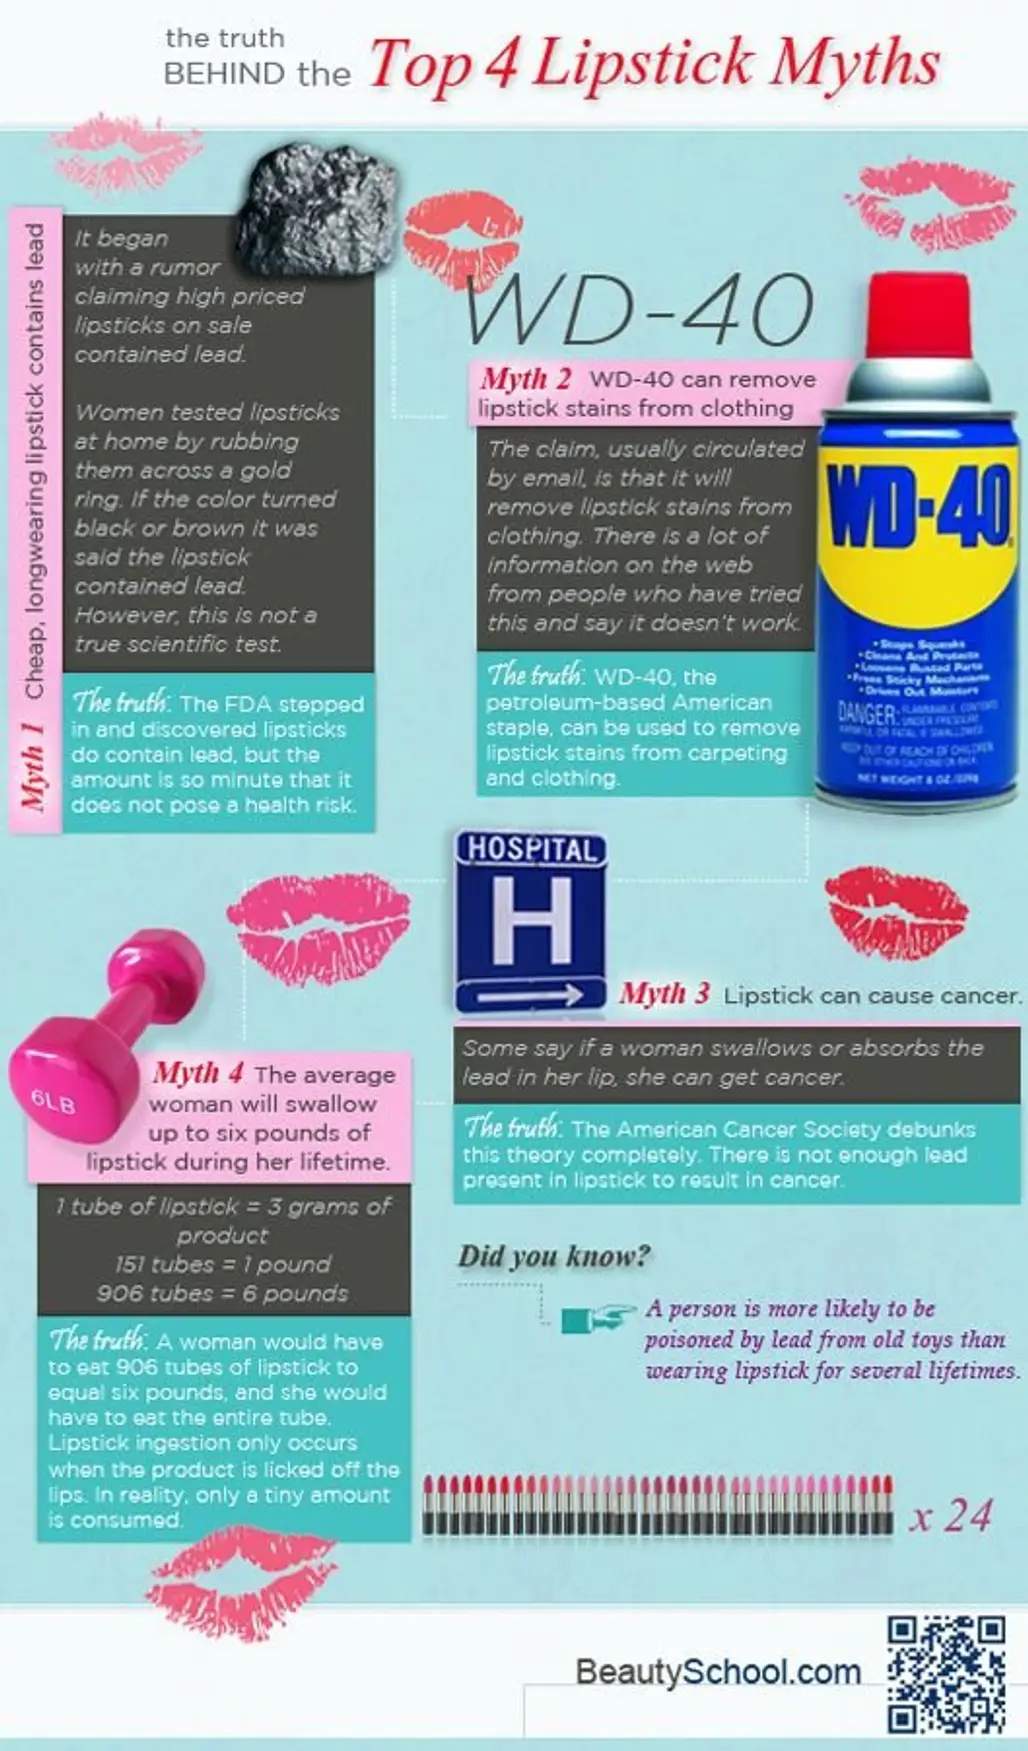 Hospital,WD-40,product,advertising,brand,